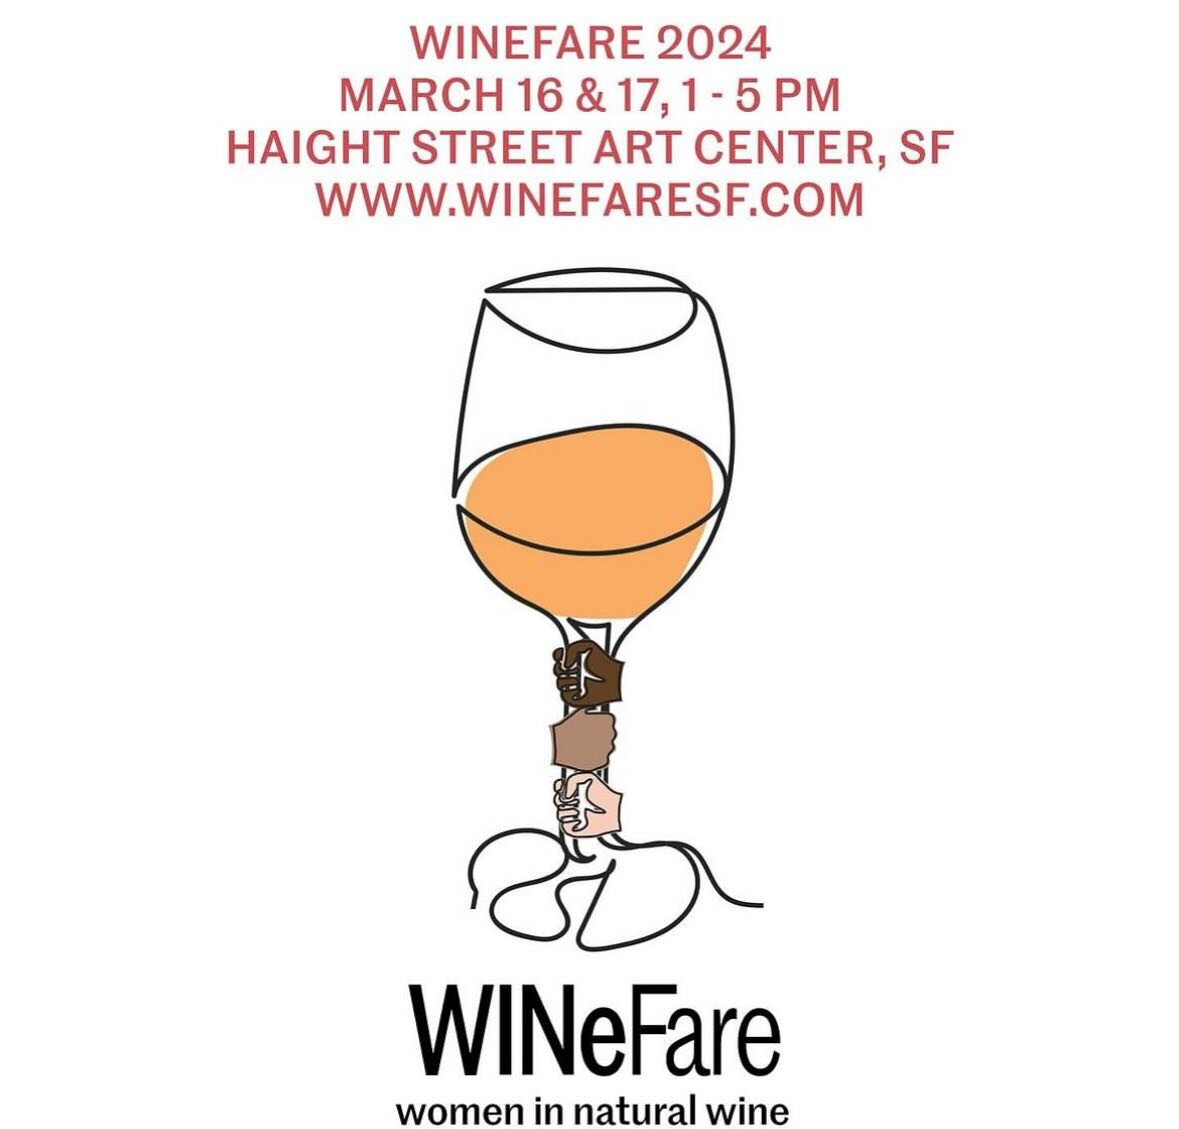 WINeFare is this weekend. One of my favorite events of the year. This year we will over 70+ woman owned brands. 

I&rsquo;ll be pouring Sunday, stop by say hello and taste through the current lineup ⚡️🫶🏽